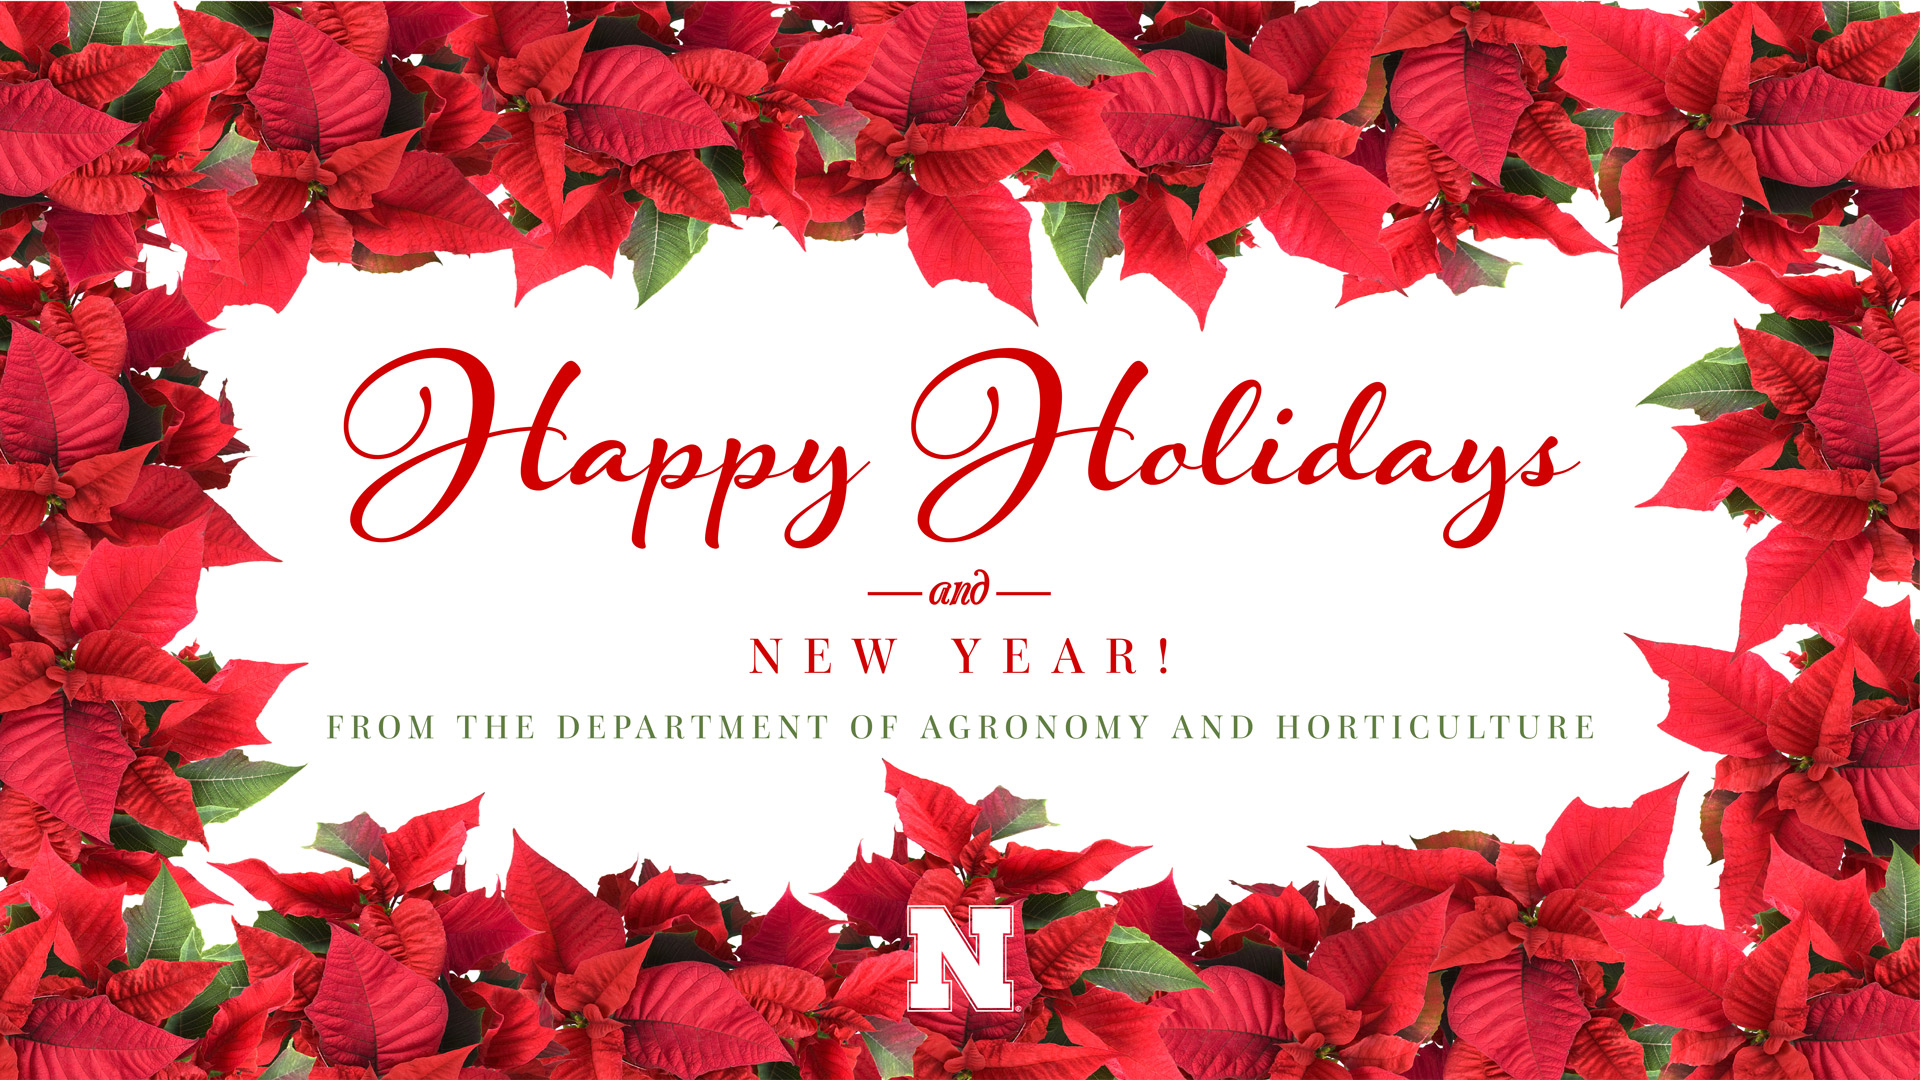 Happy Holidays from Agronomy and Horticulture